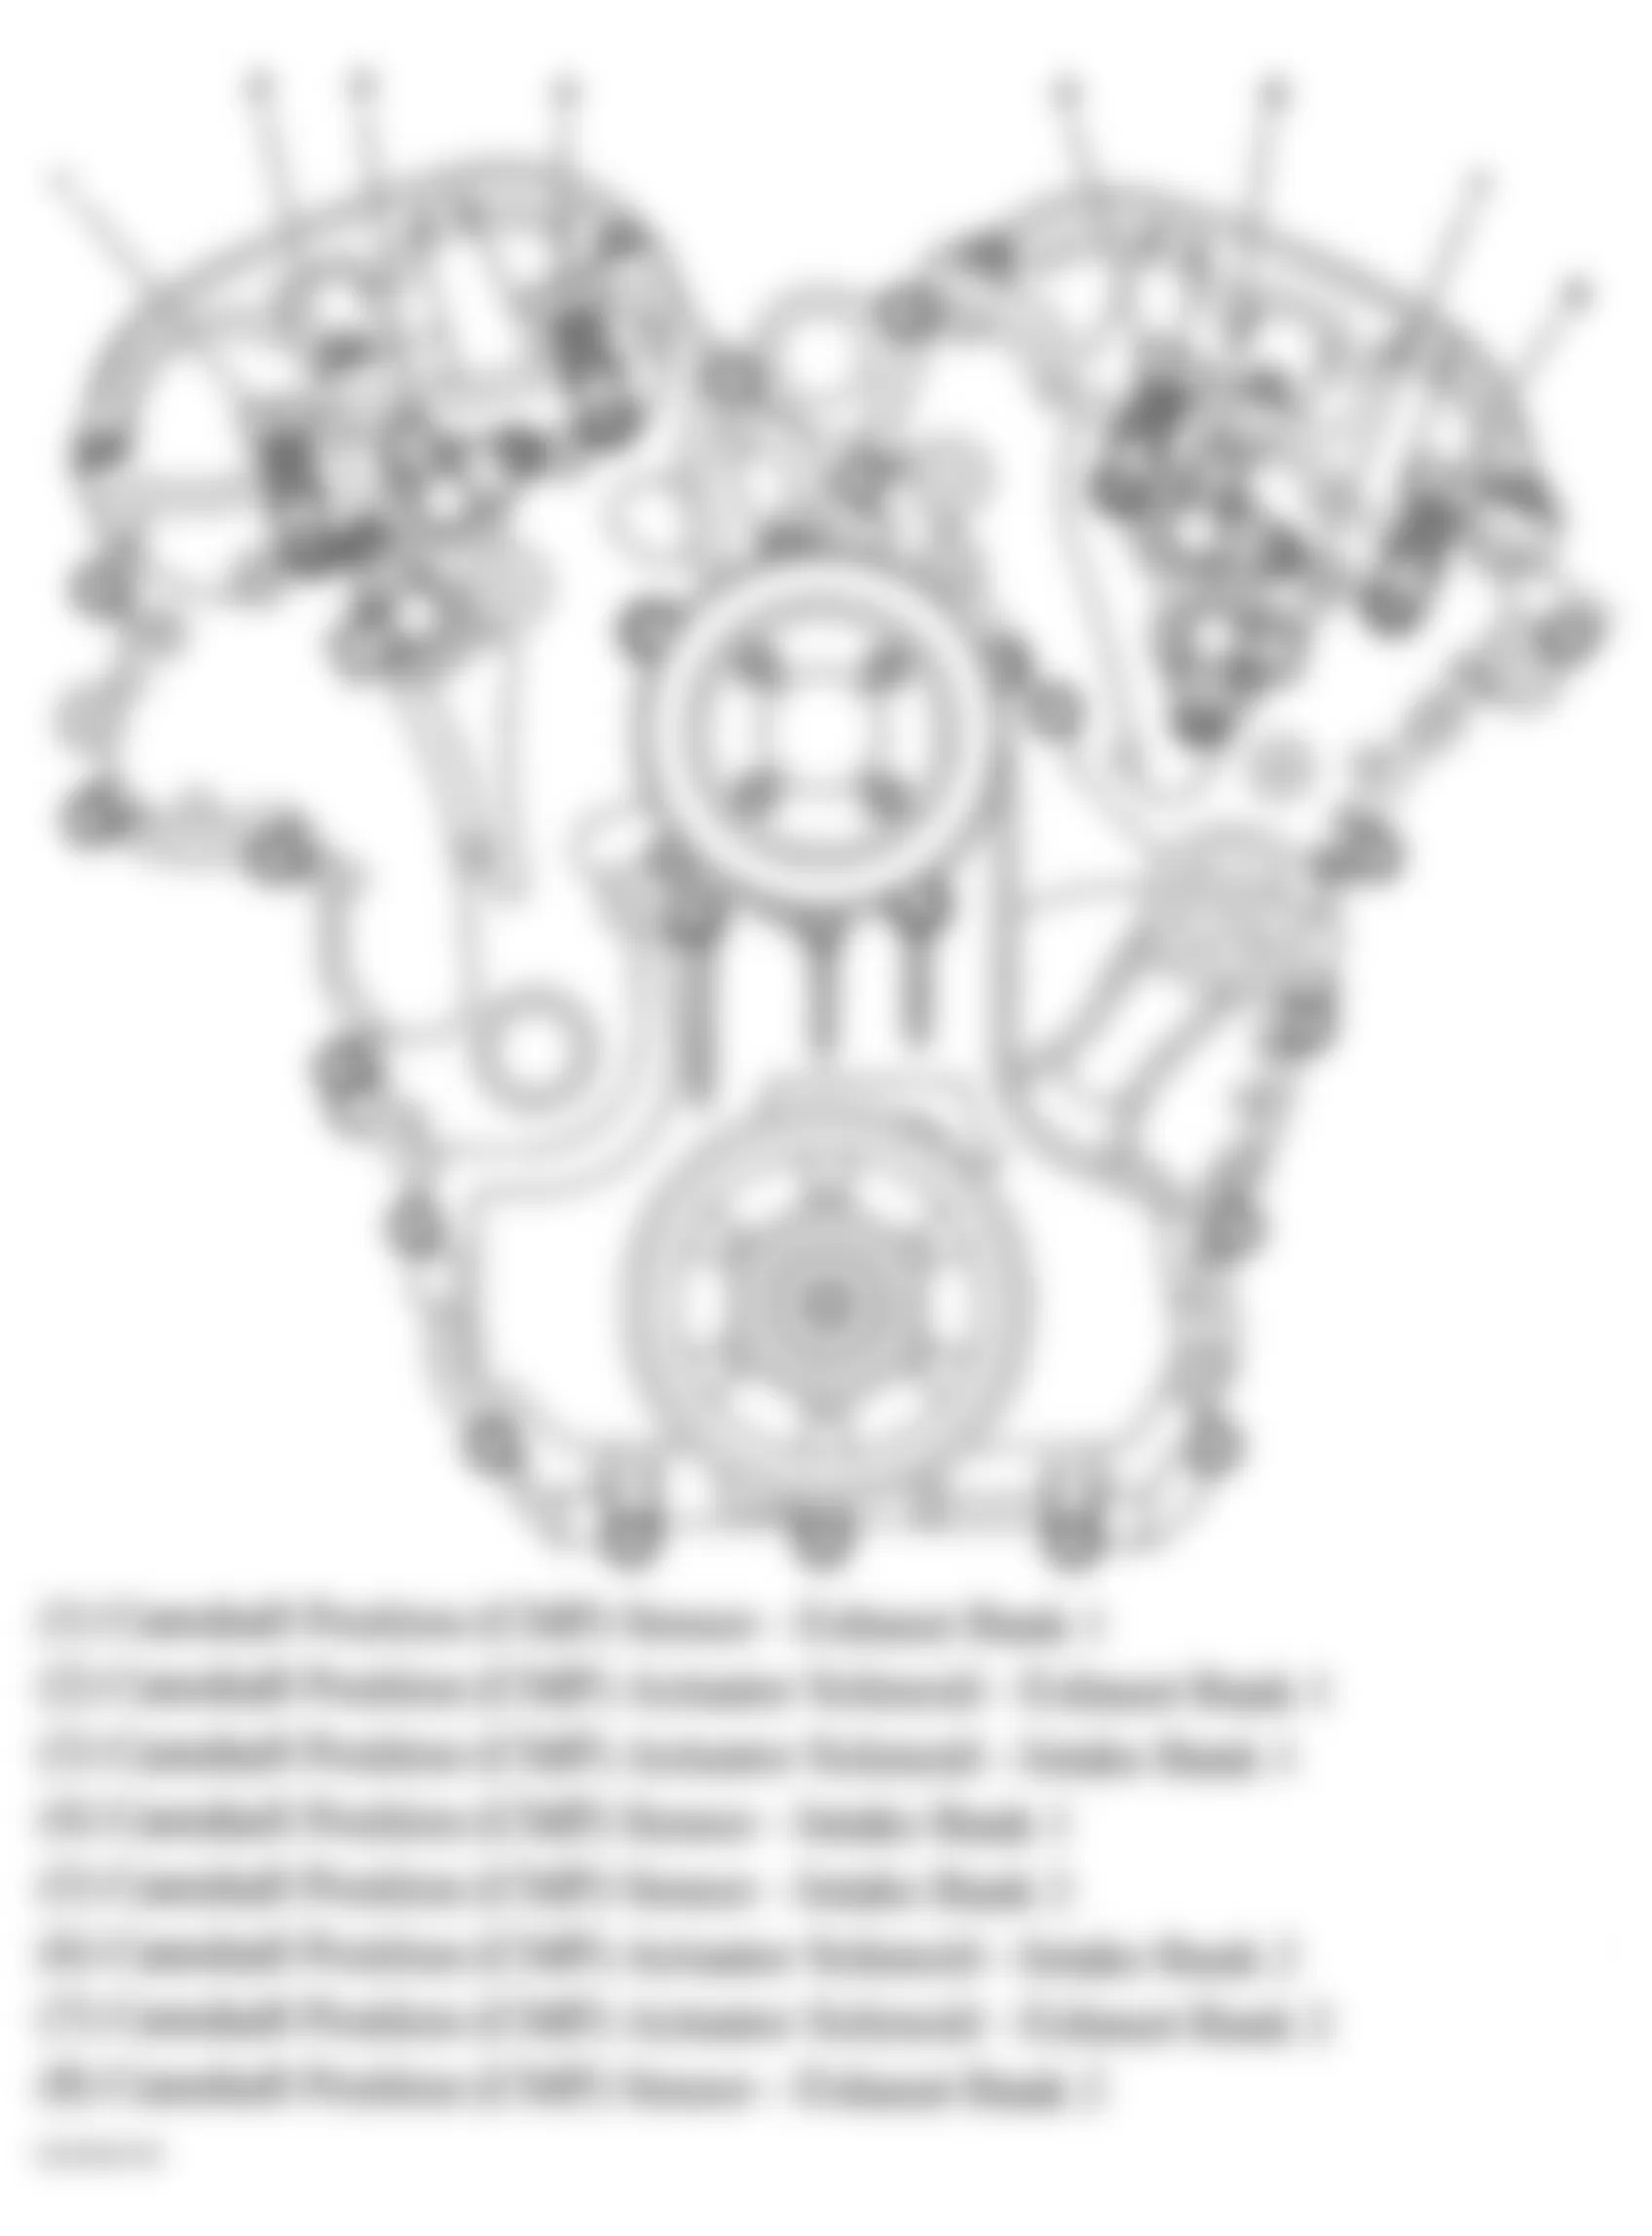 Buick LaCrosse CXL 2005 - Component Locations -  Front Of Engine (3.6L)